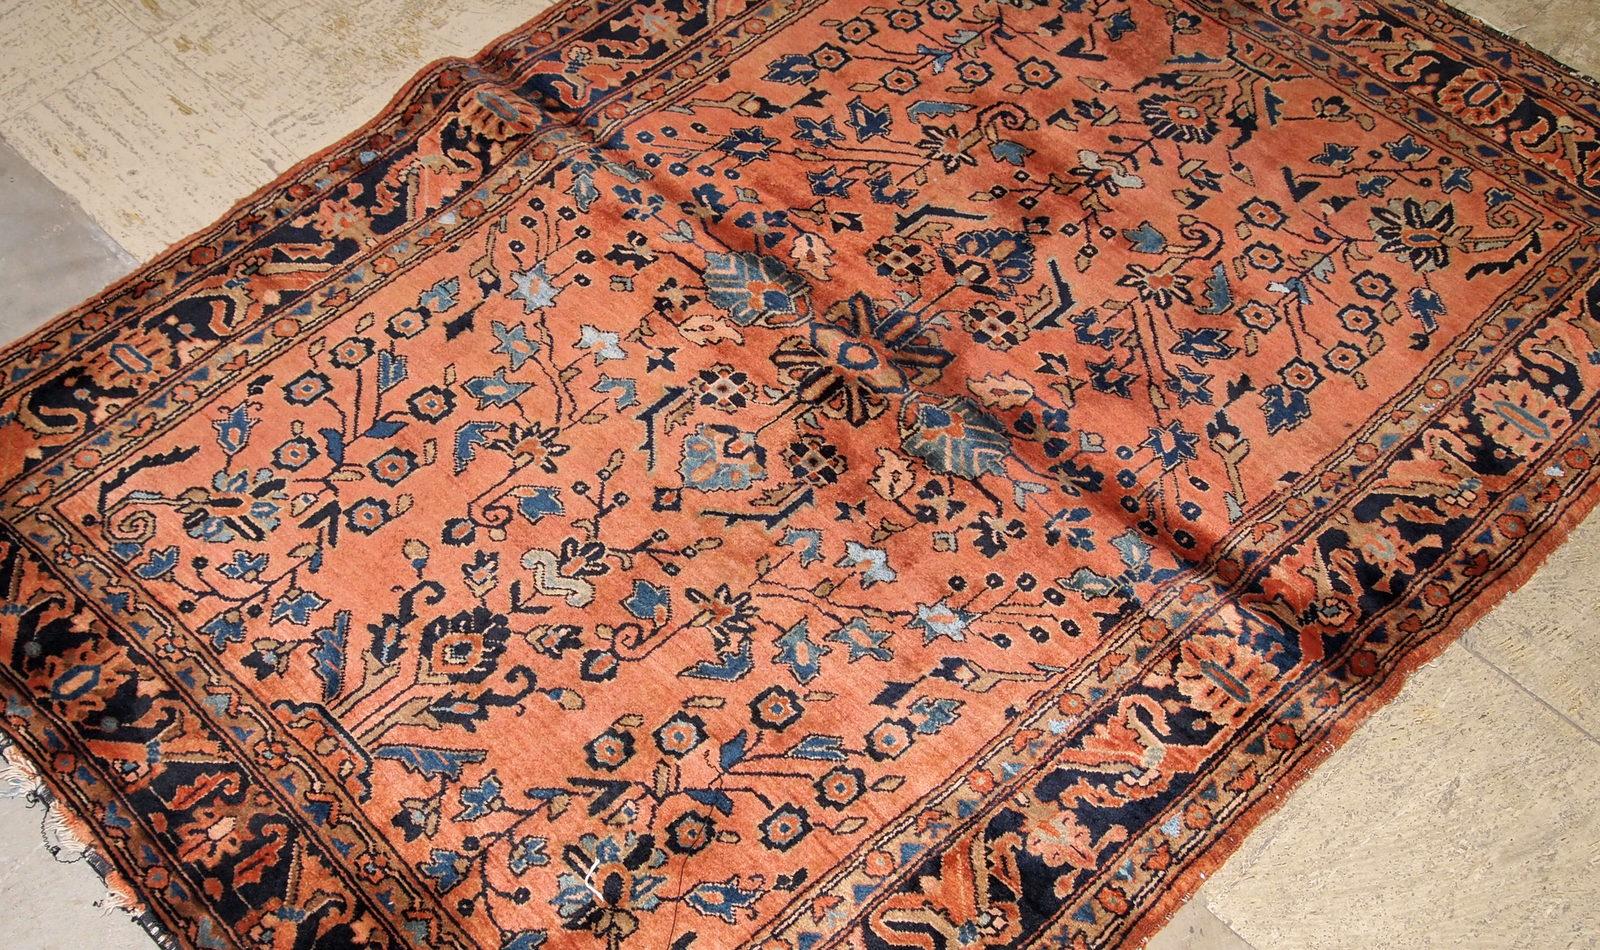 Handmade antique Sarouk rug in original good condition from 1920s. 

-condition: original good,

-circa: 1920s,

-size: 3.2' x 5.1' ( 97cm x 155cm ),

-material: wool,

-country of origin: Middle East,

-style: Sarouk,

-background